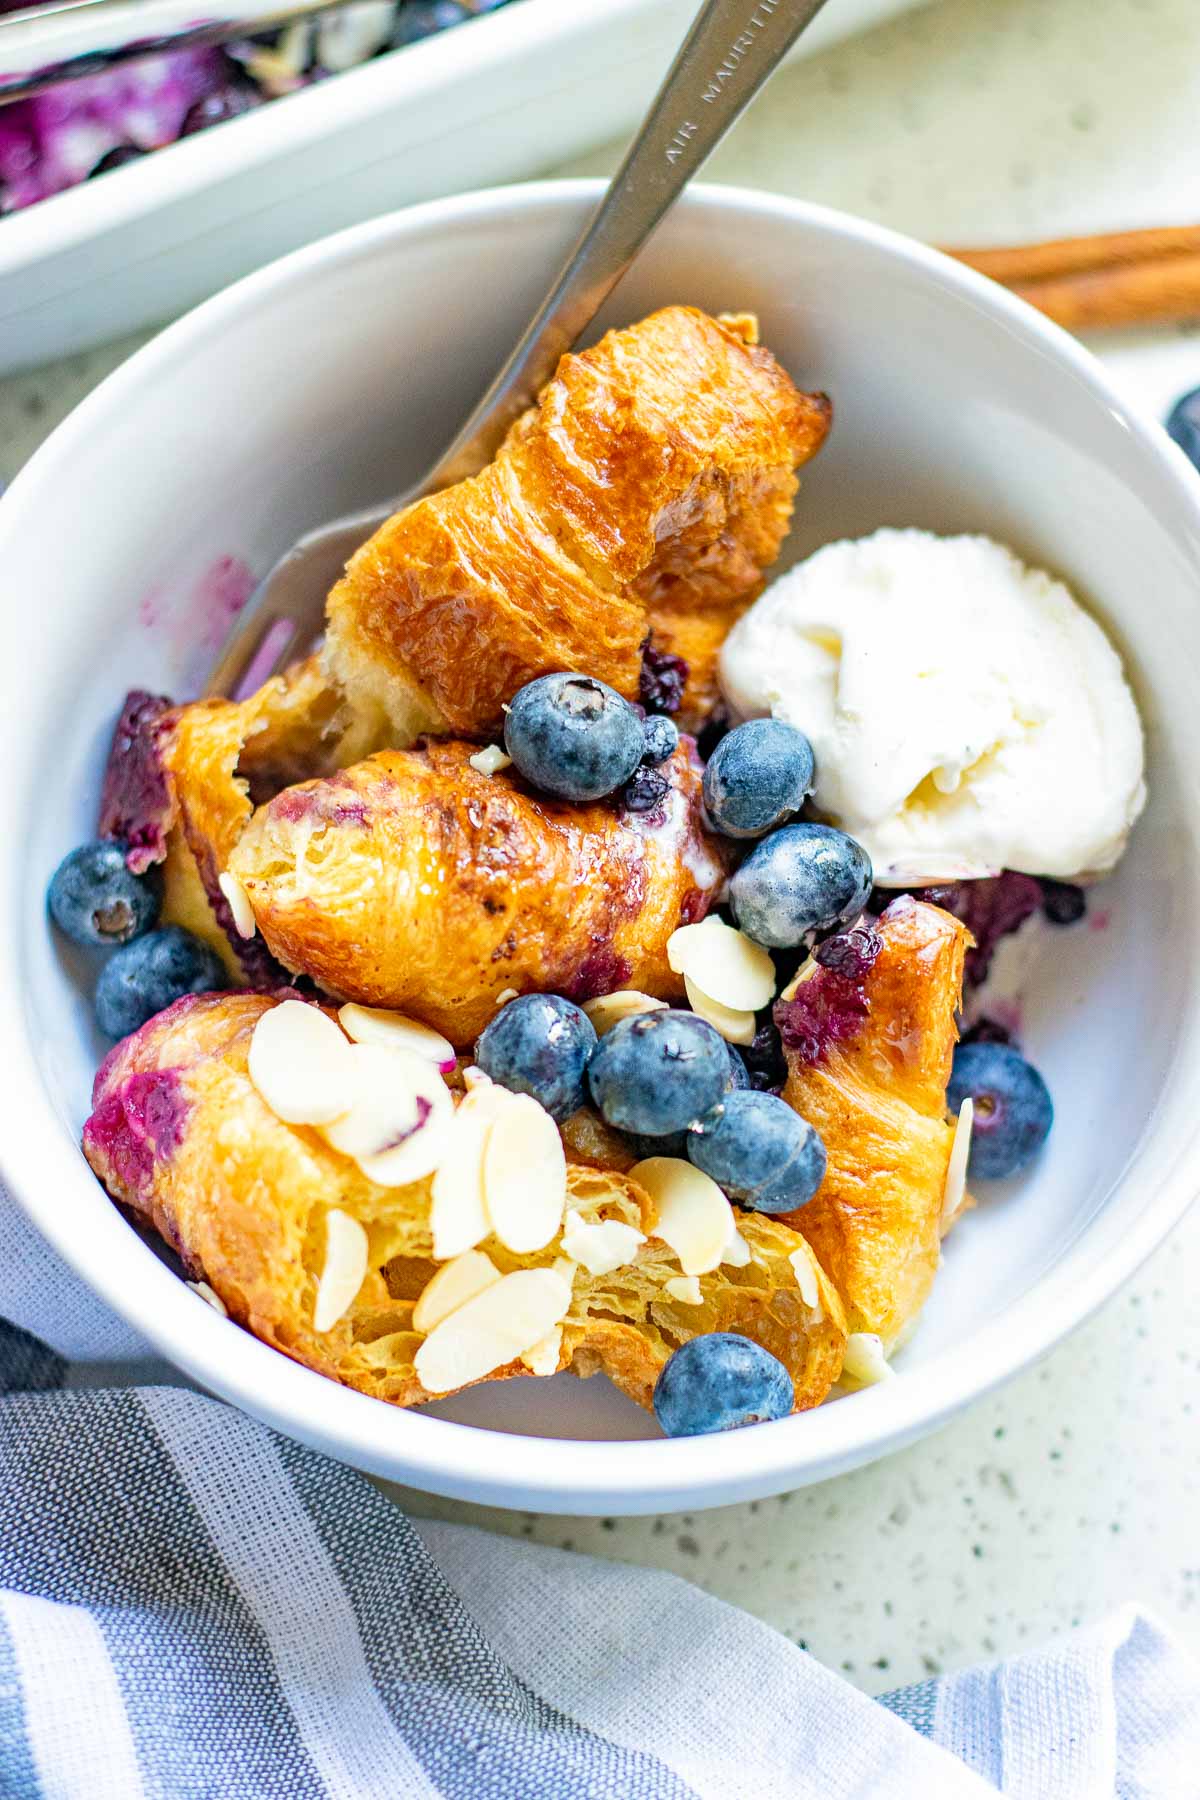 baked croissant french toast serving